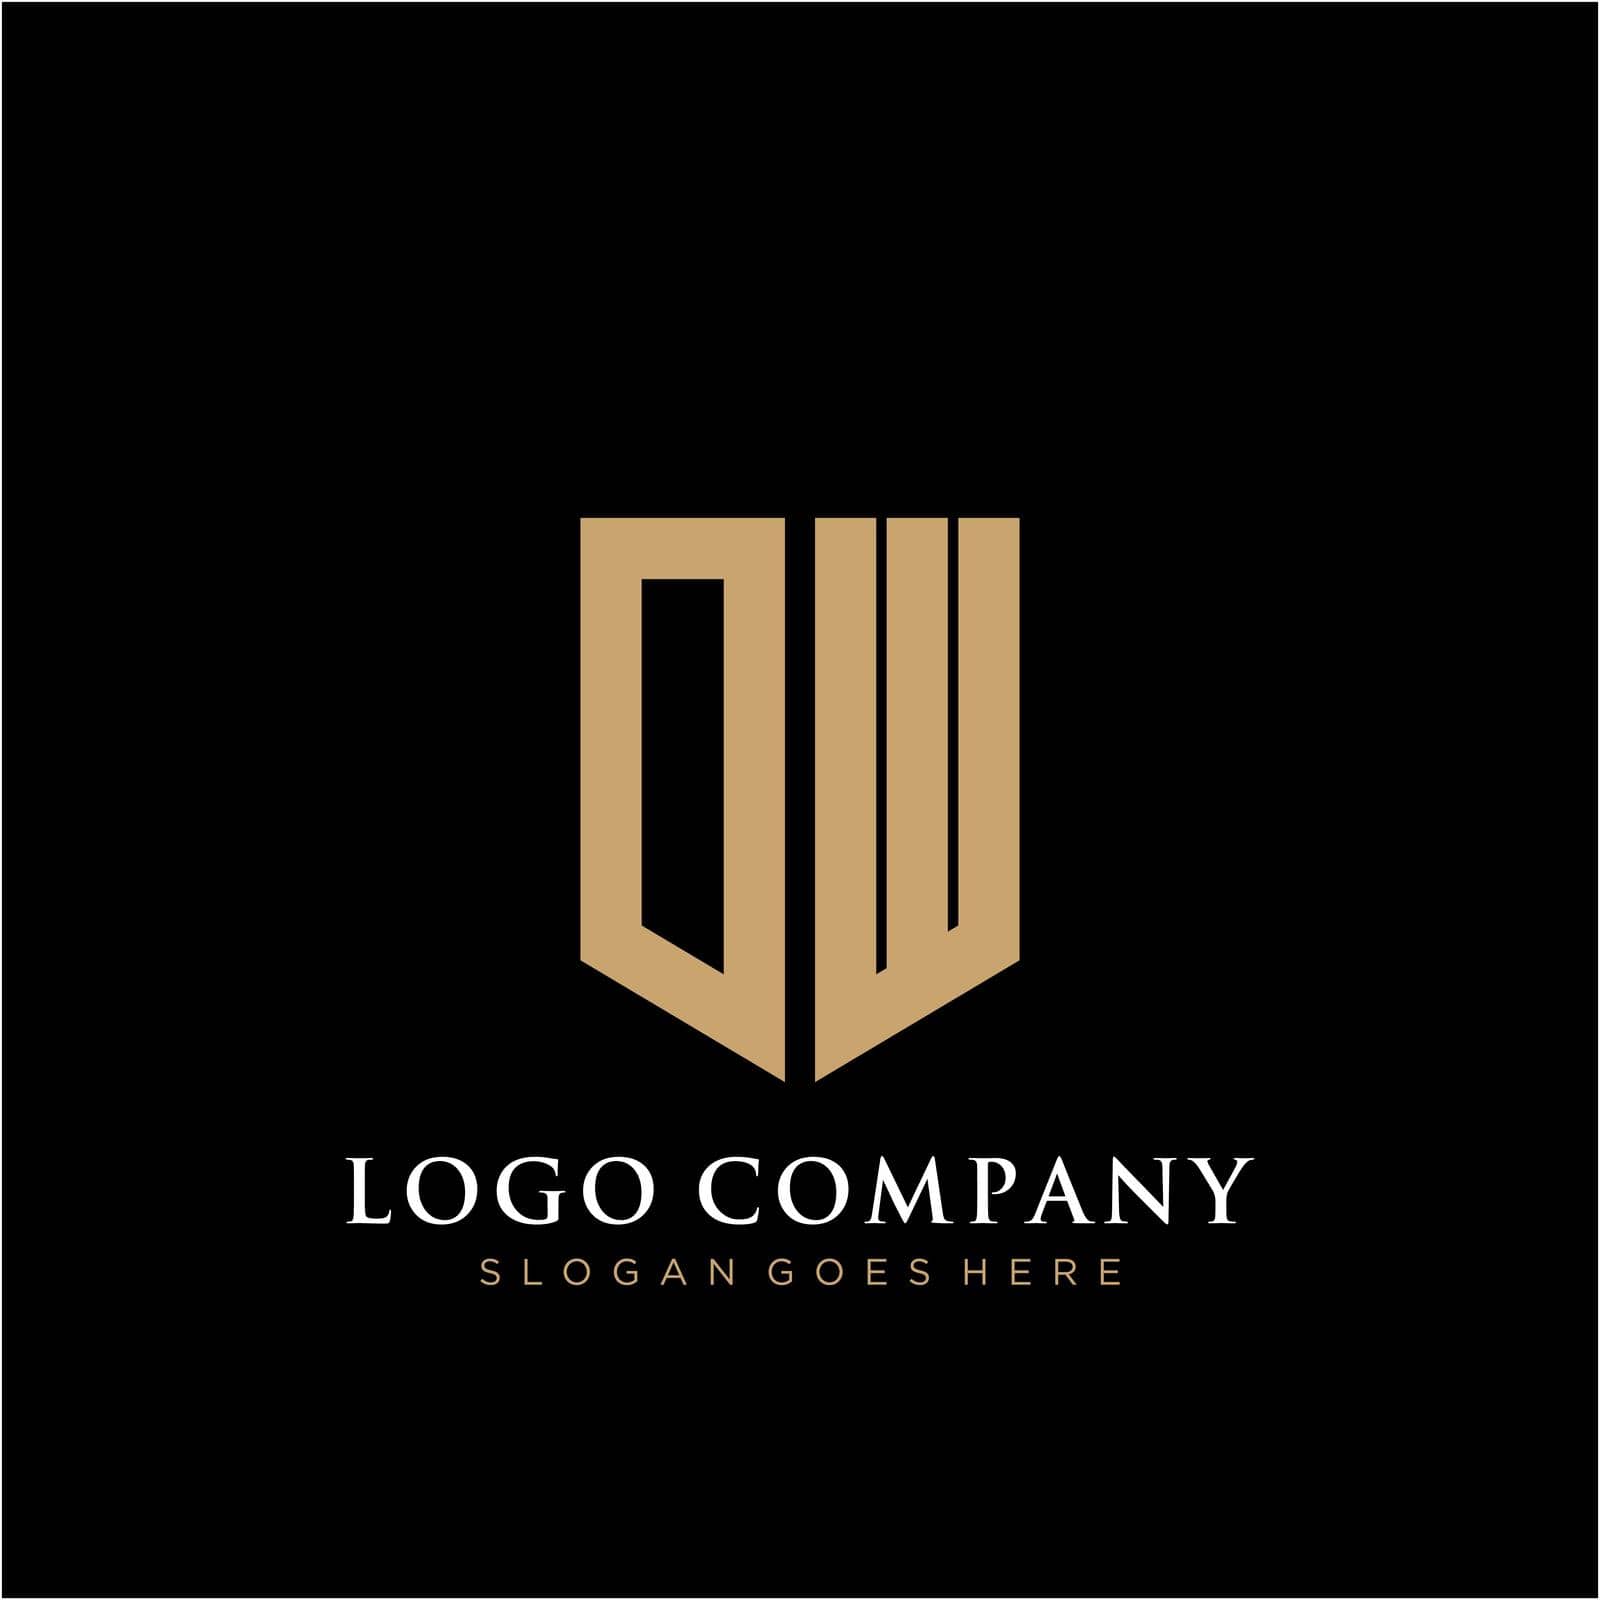 OW Letter logo icon design template elements by liaanniesatul